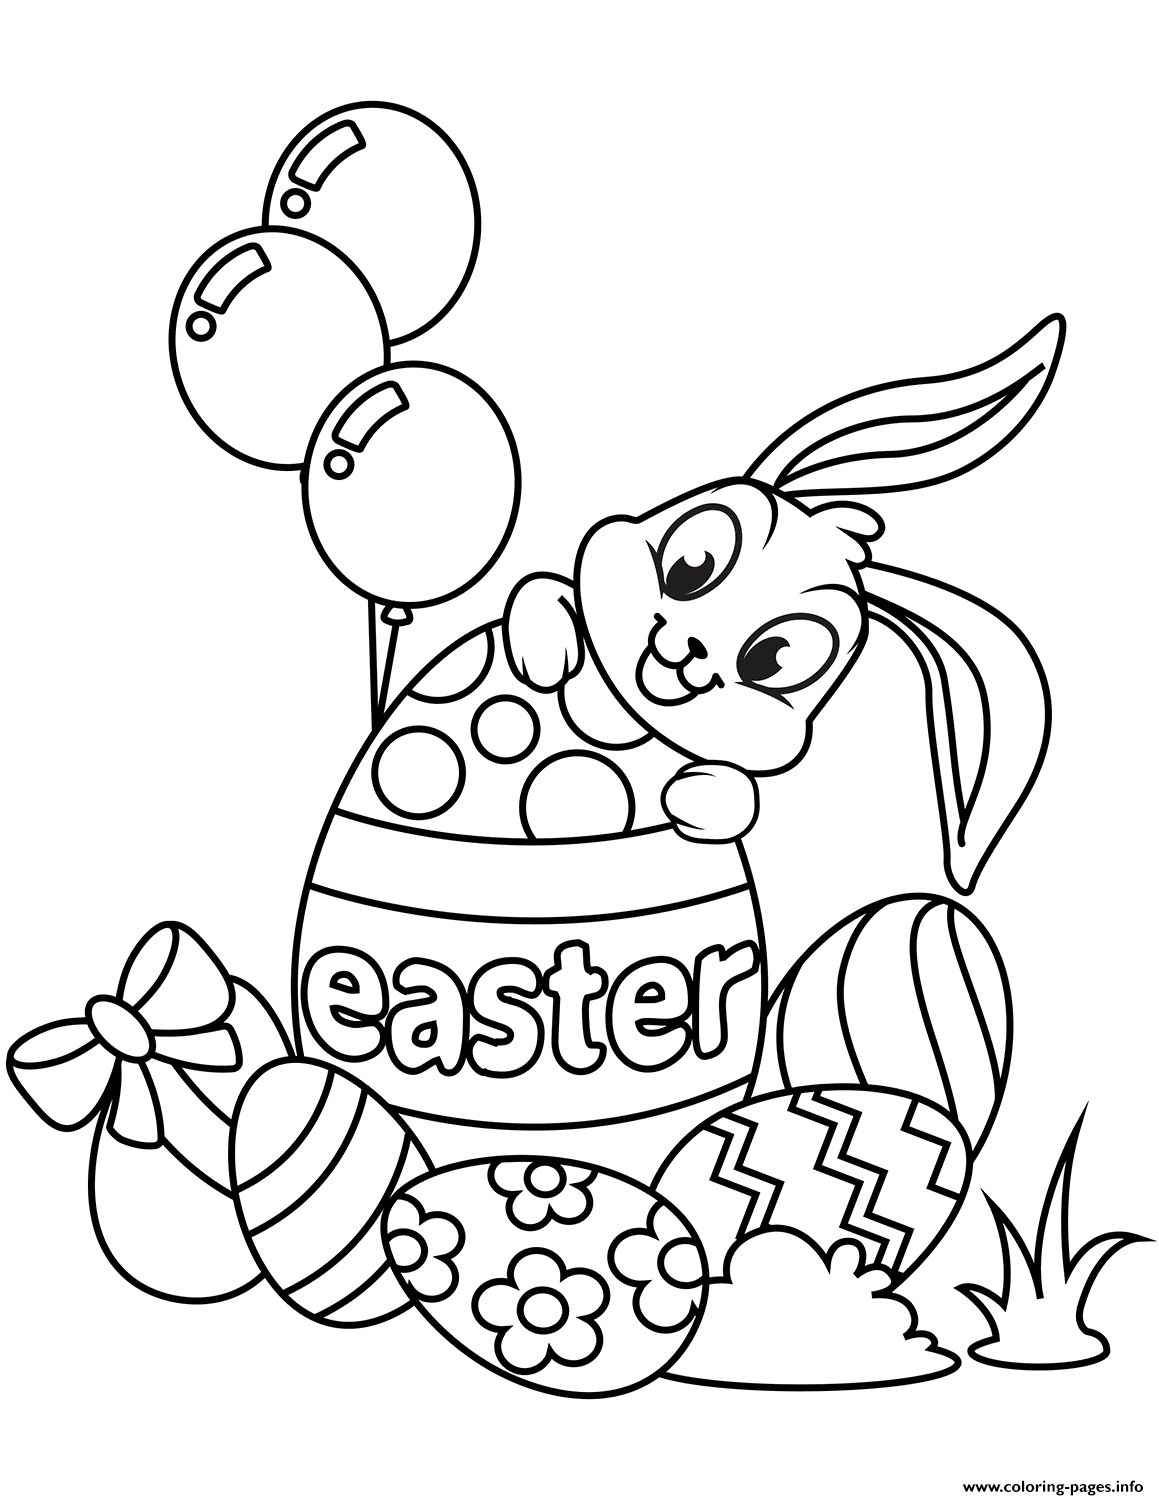 Cute easter bunny and eggs coloring page printable